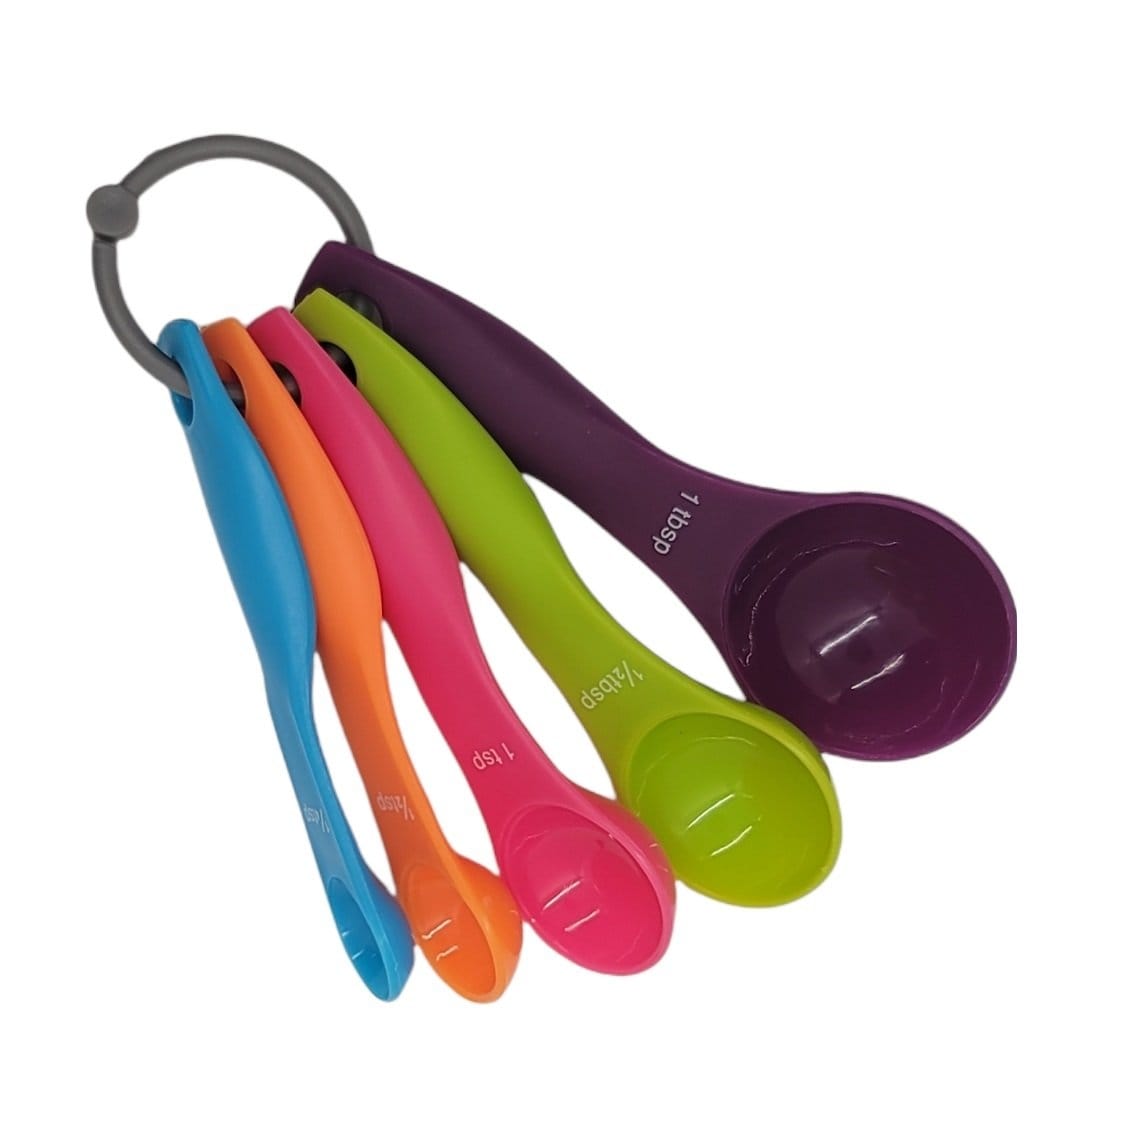 https://ak1.ostkcdn.com/images/products/is/images/direct/28d70f00814238248abd9385a95f5907be1f0016/5-Piece-Colorful-Plastic-Nesting-Measuring-Spoon-Set---1-4-tsp-to-1-tbsp-for-Dry-or-Liquid-Ingredients.jpg